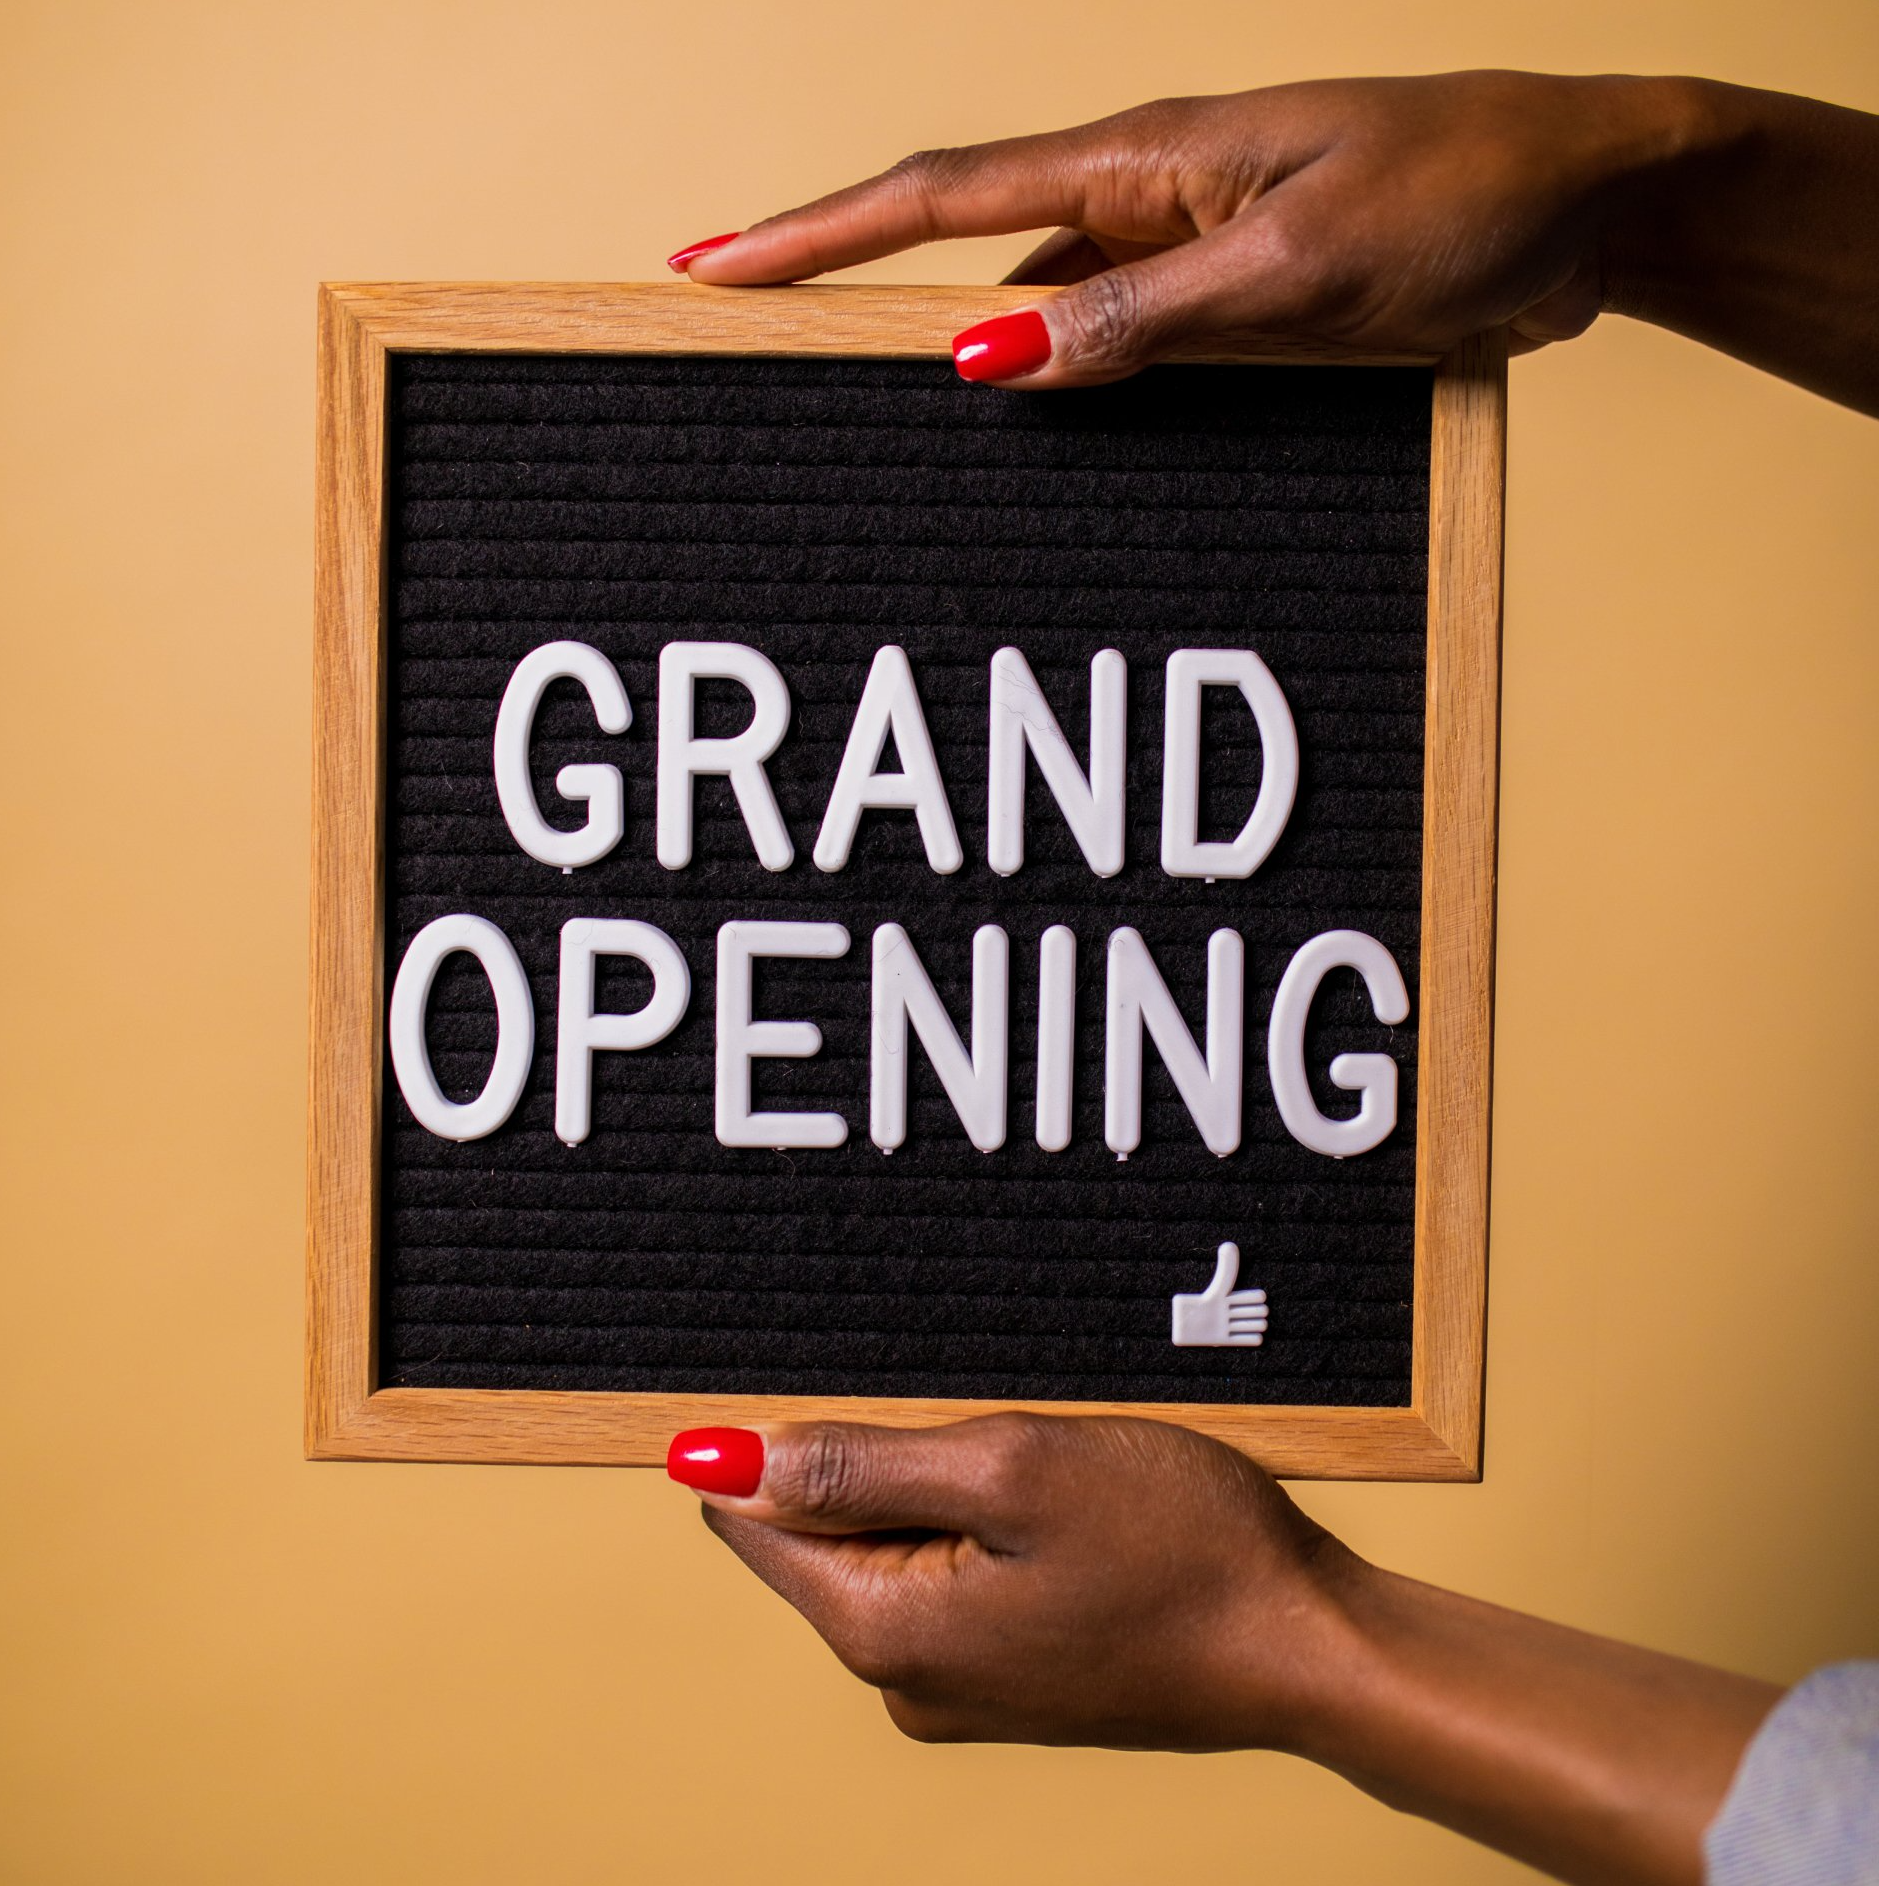 Grad Opening or Re-Opening your businesses